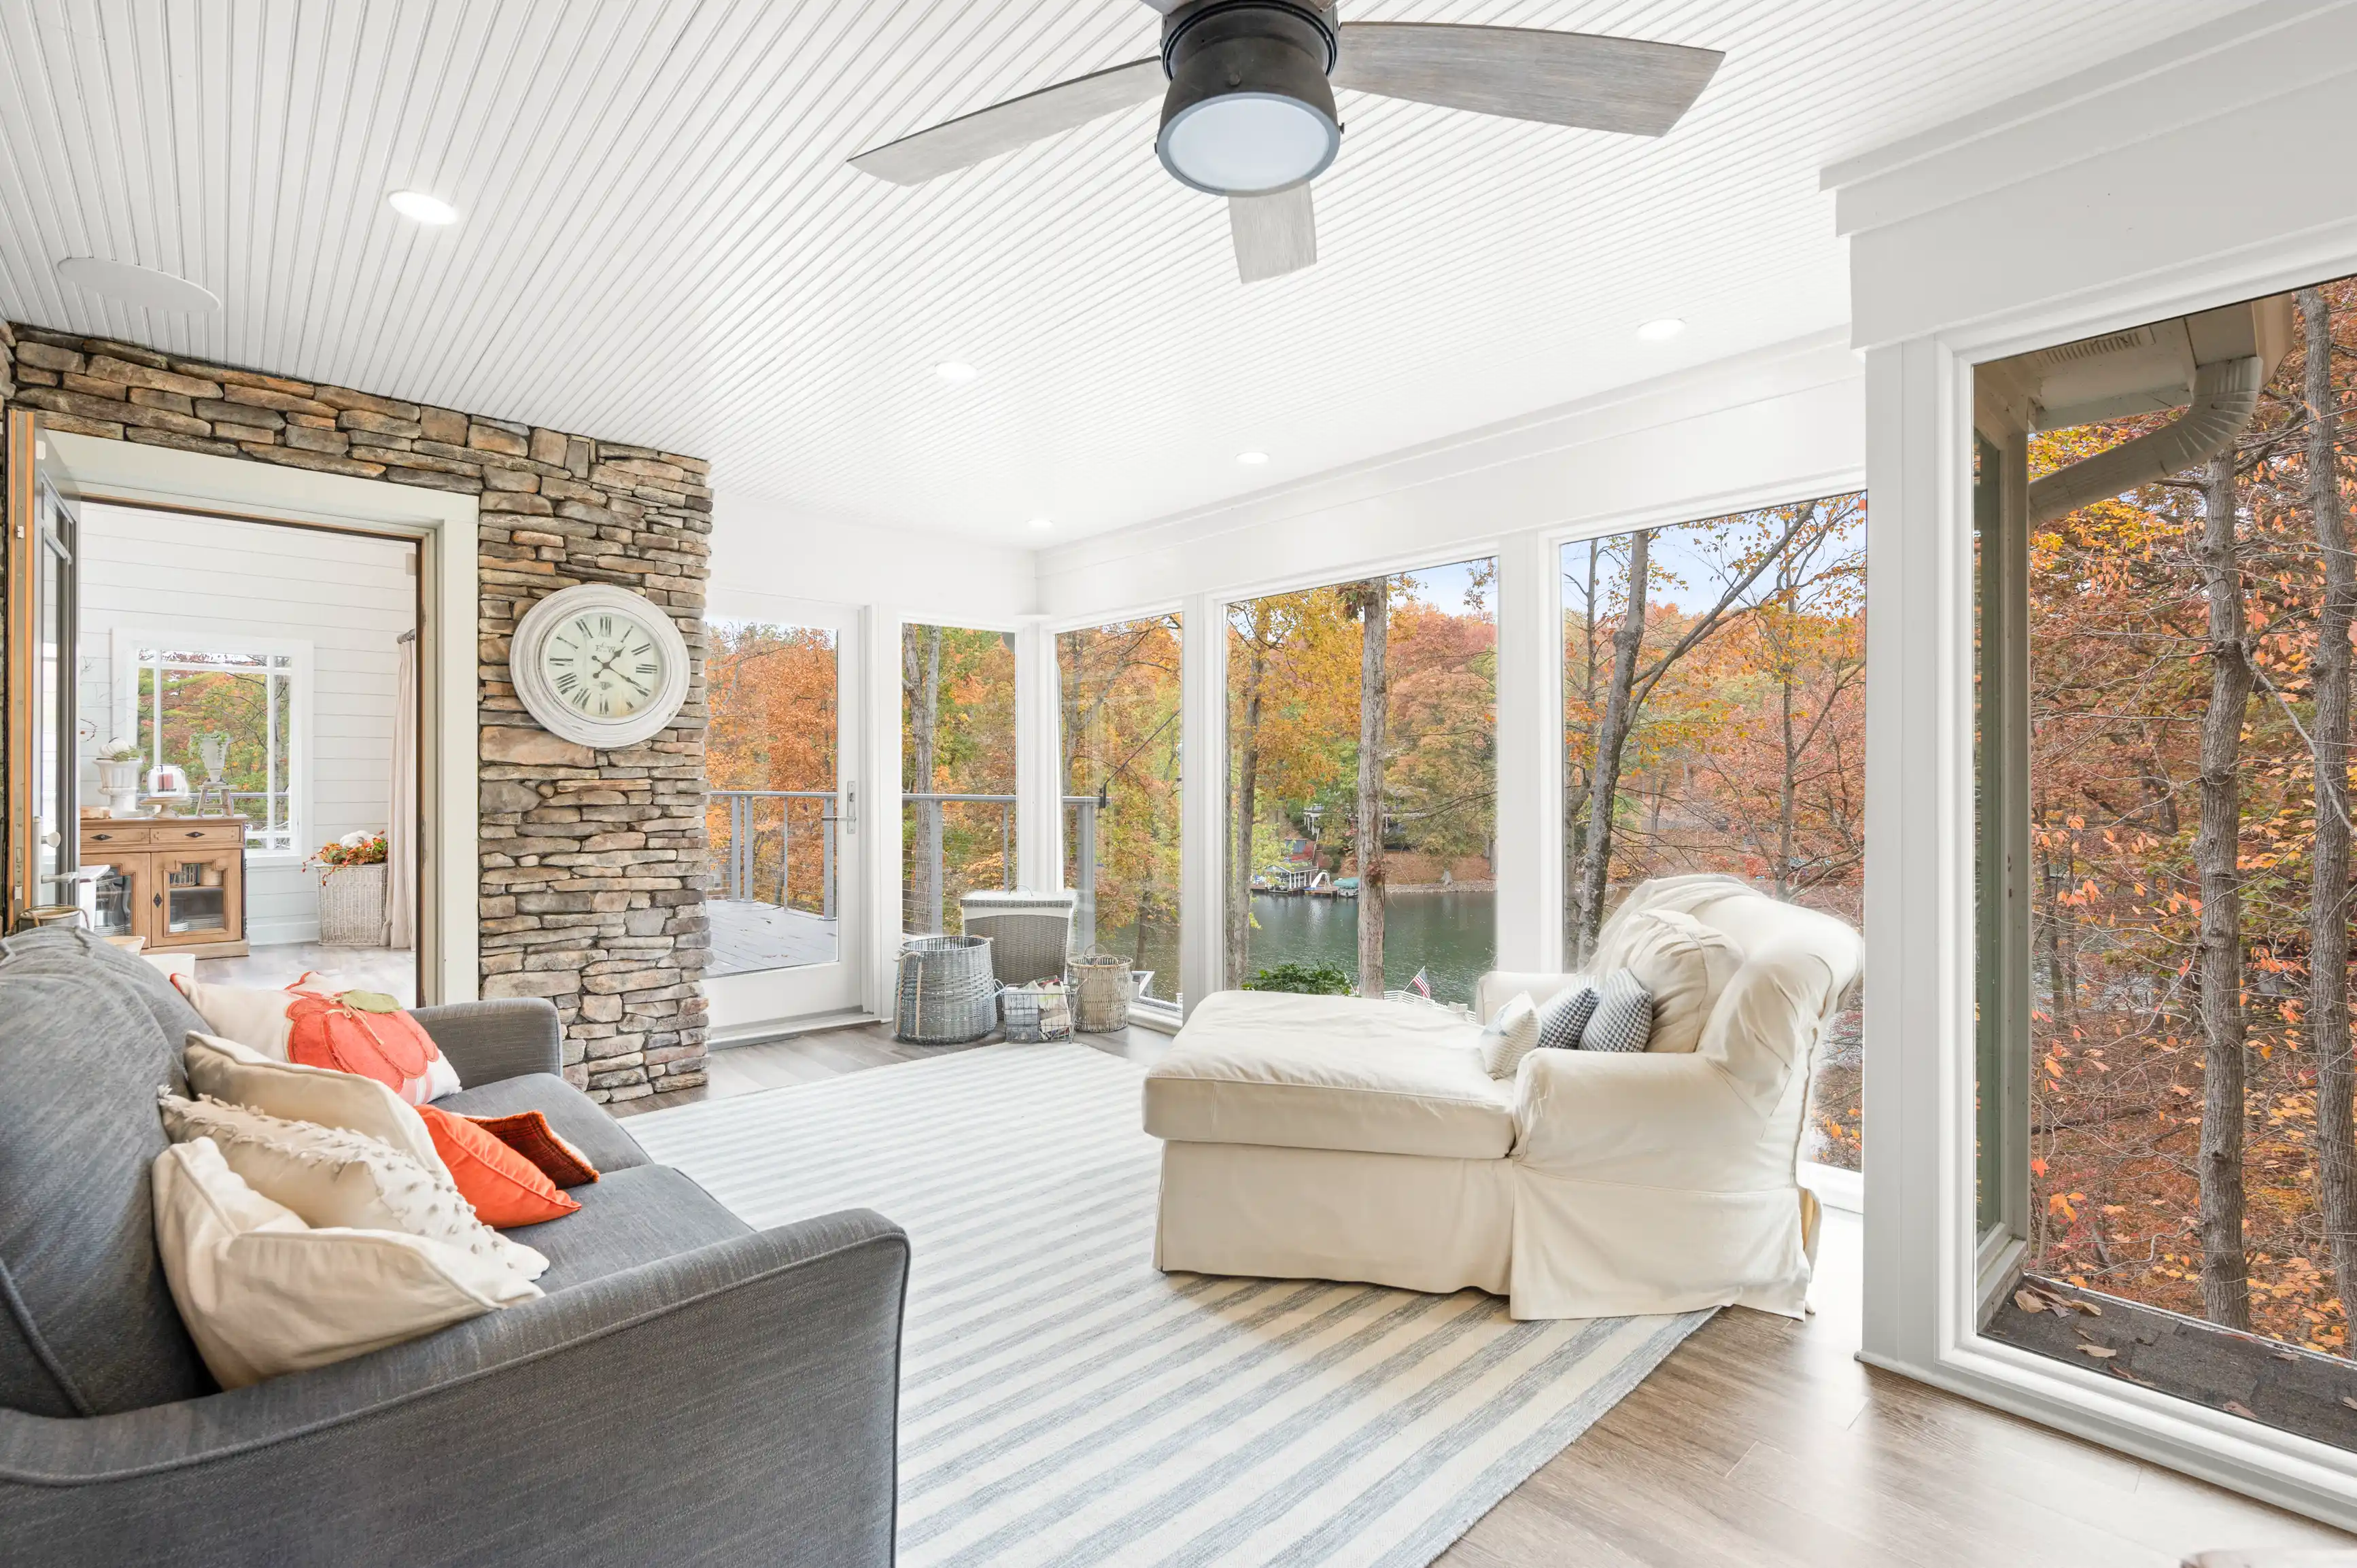 Bright and airy sunroom with large windows showing fall foliage, stone fireplace, comfortable seating, and ceiling fan.